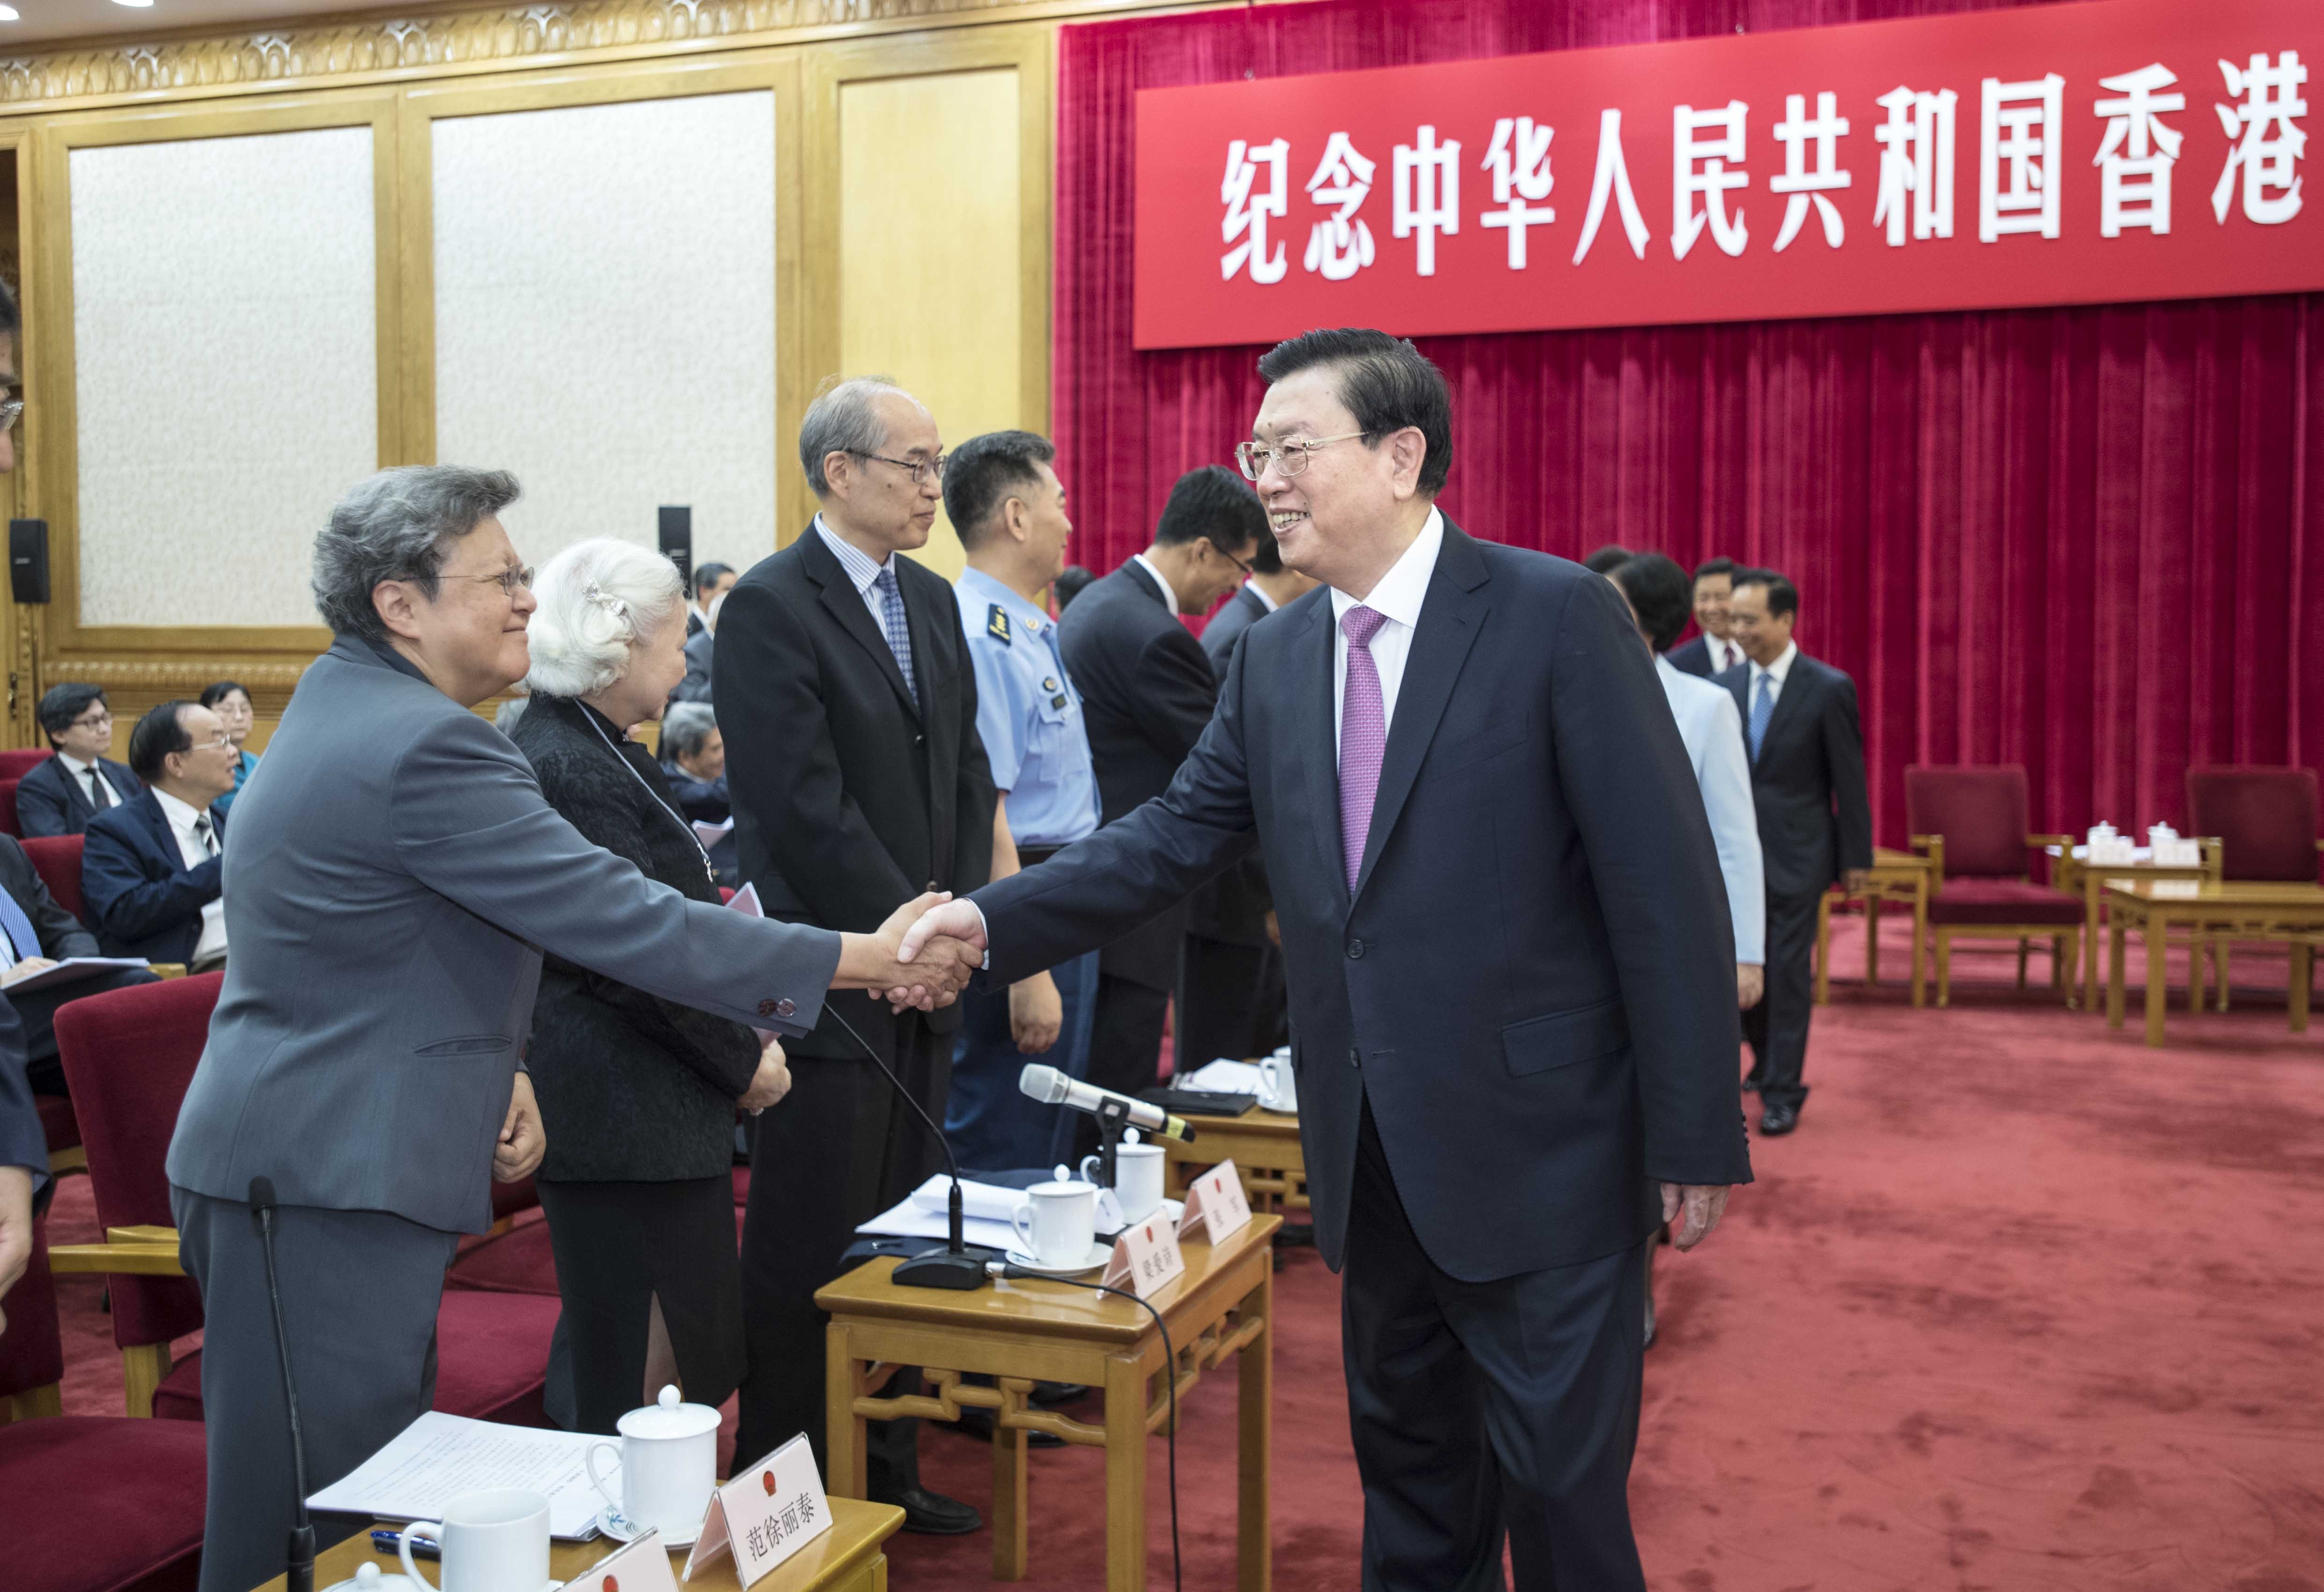 Zhang Dejiang shakes hands with Hong Kong’s Rita Fan Hsu Lai-tai, a member of the NPC Standing Committee, at a high-ranking symposium commemorating the 20th anniversary of the implementation of the Basic Law, at the Great Hall of the People in Beijing on May 27. Photo: Xinhua